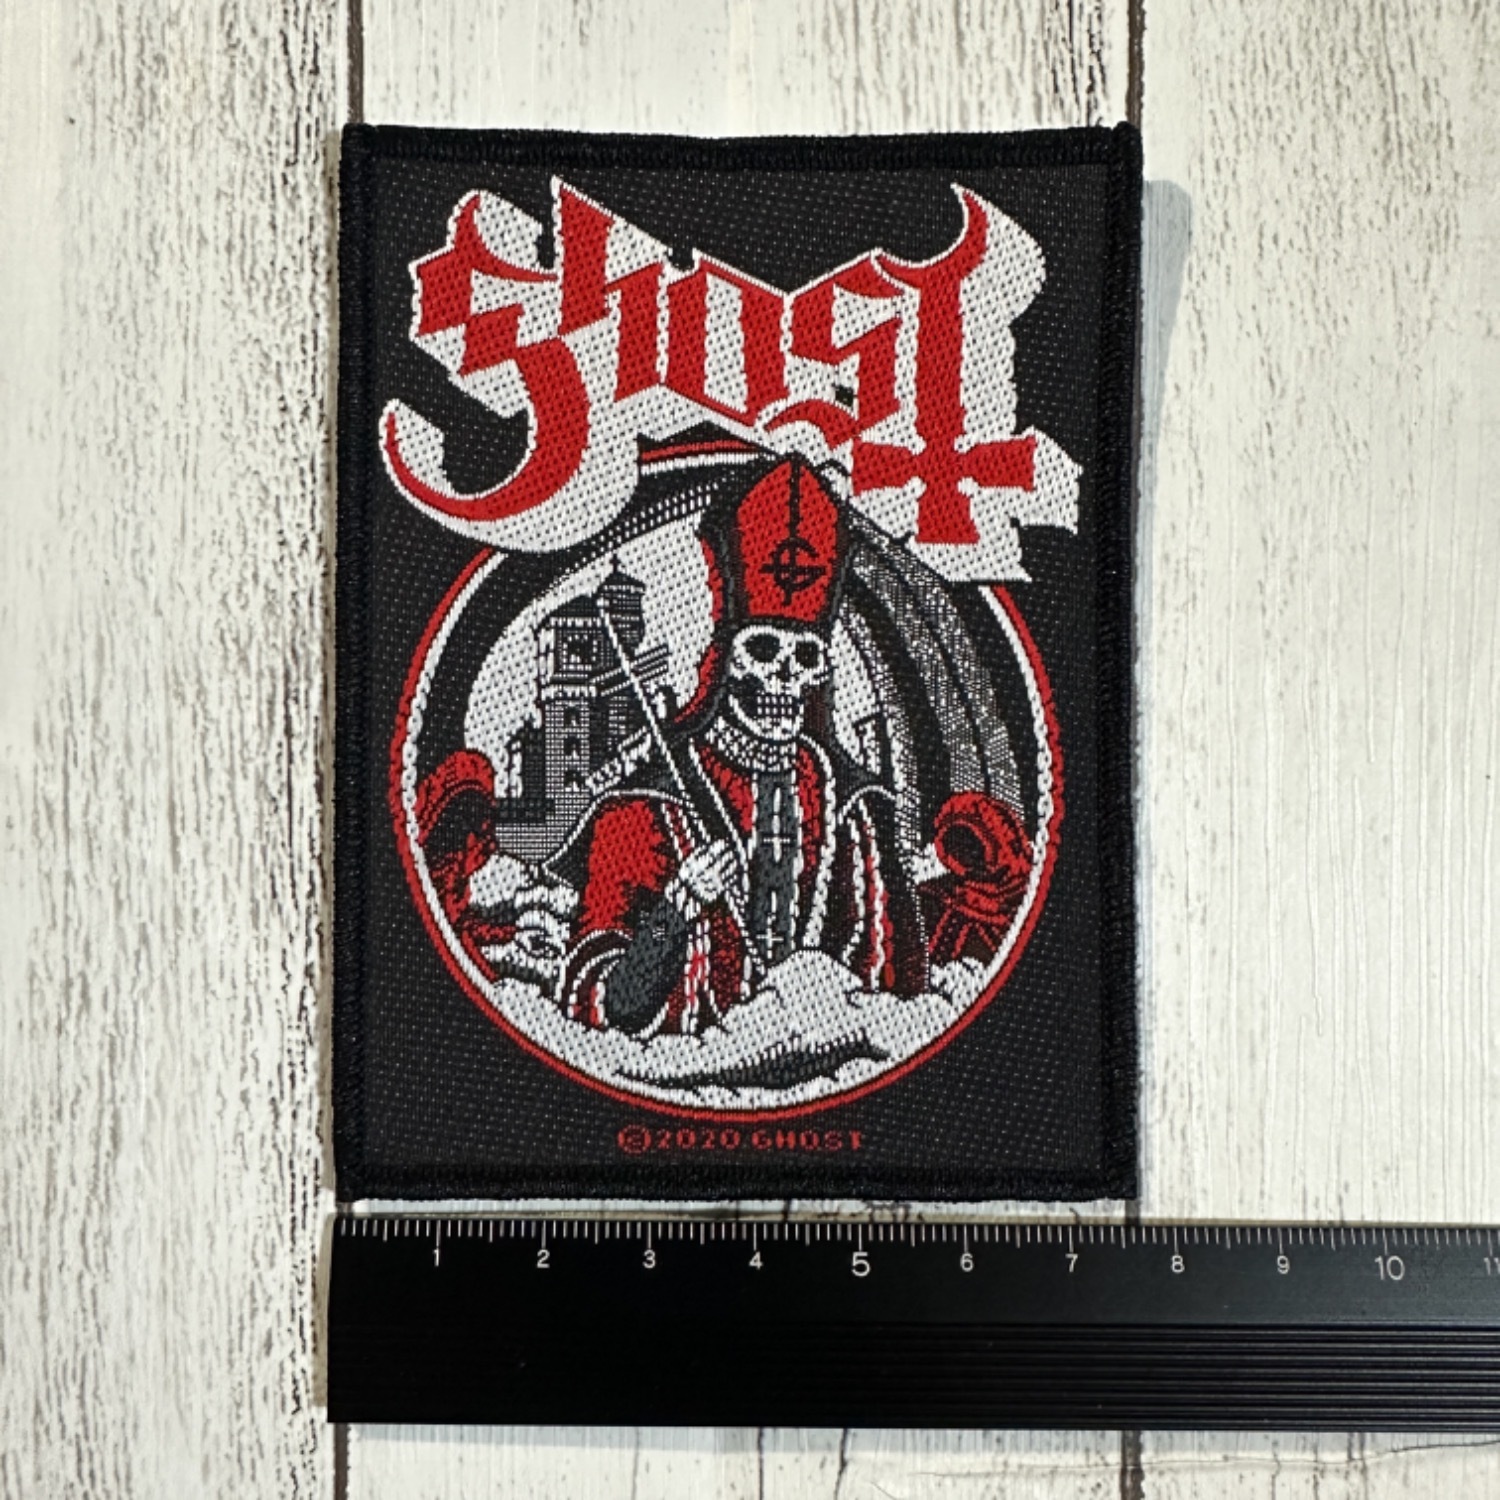 【Patch】Ghost - SECULAR HAZE 【Small Patch】